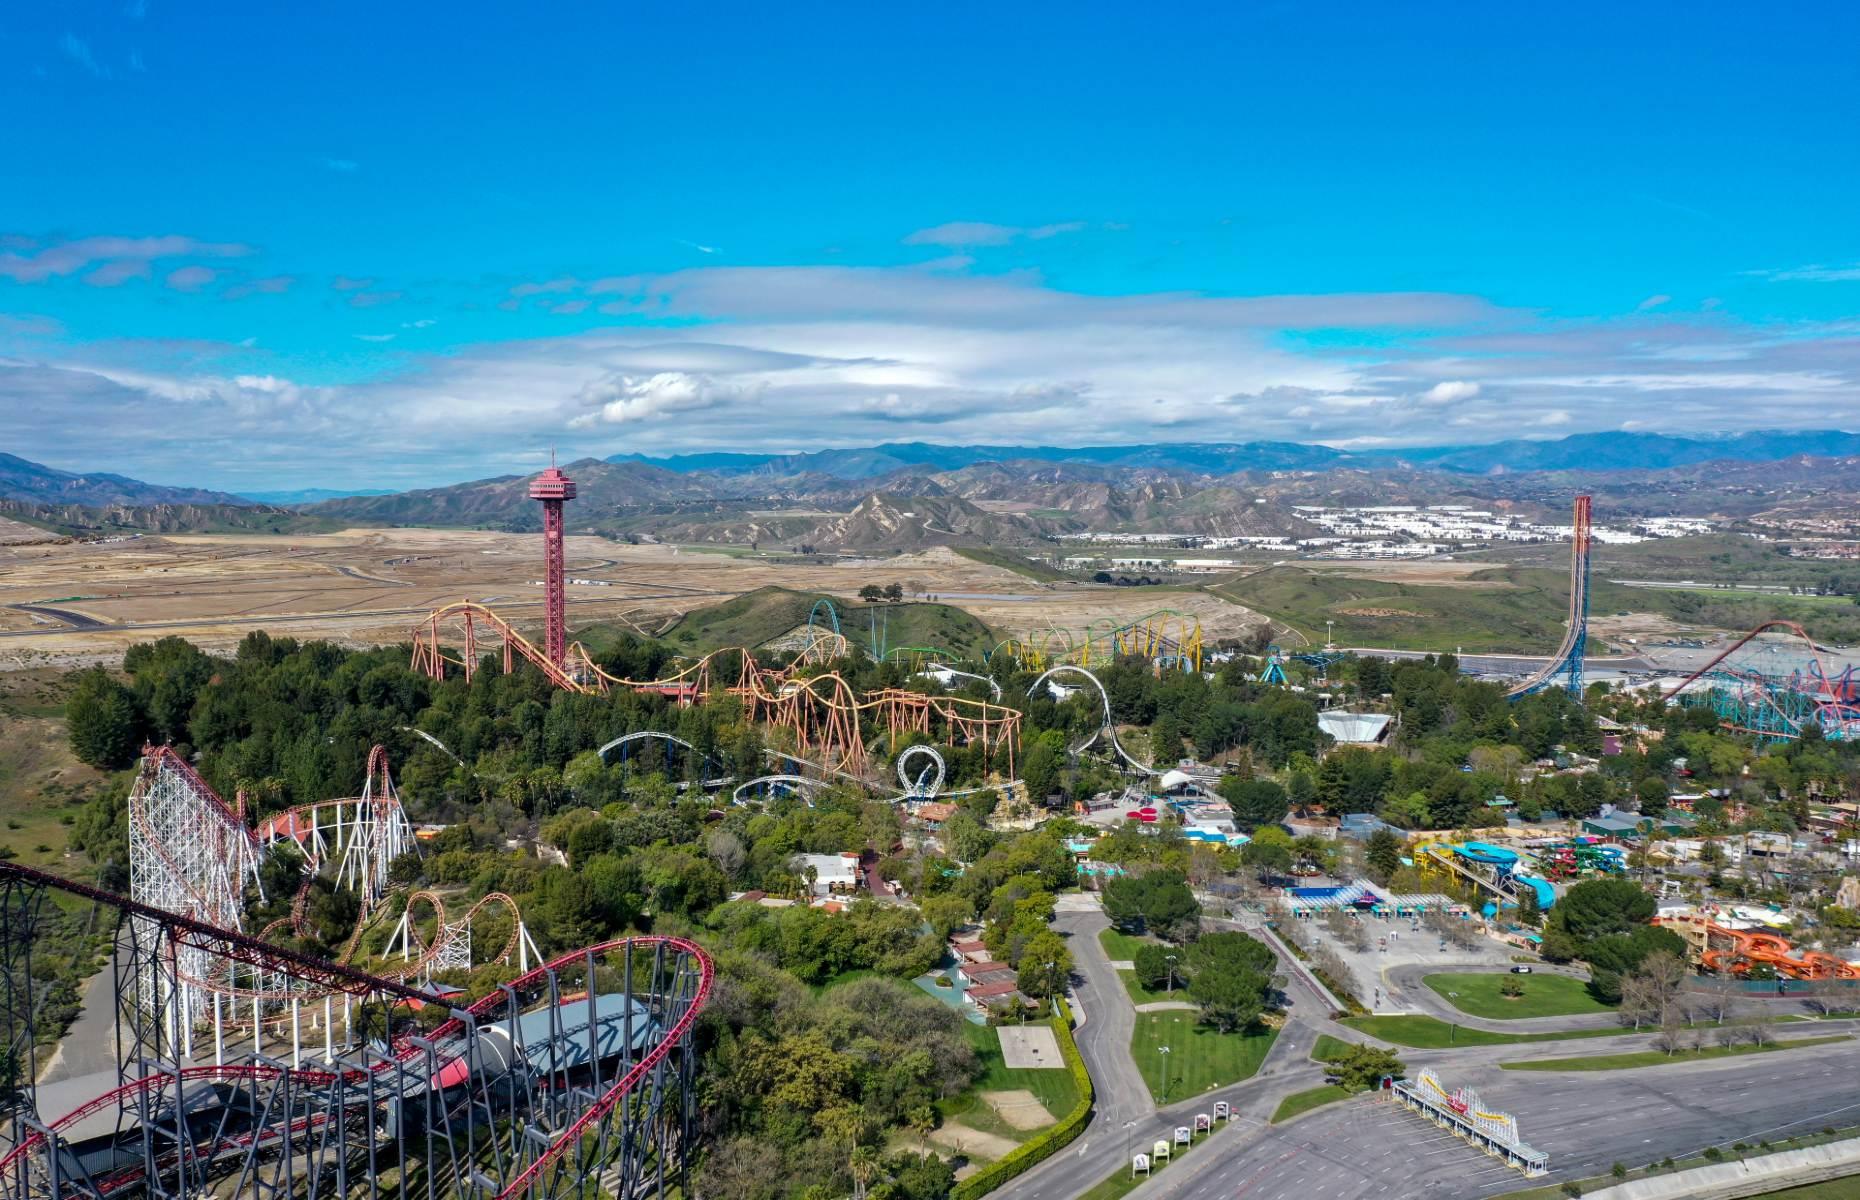 <p>So which theme park has the most of these incredible, white-knuckle, hair-raising rides? And the winner is… Six Flags Magic Mountain in California, US. It has a whopping 20 individual roller coasters. Time to plan a trip…</p>  <p><a href="https://www.loveexploring.com/galleries/65669/unusual-things-youll-find-on-a-road-trip-through-the-usa?page=1"><strong>Now discover the USA's best roadside attractions worth traveling to</strong></a></p>  <p><span><strong>Liked this? Click on the Follow button above for more great stories from loveEXPLORING</strong></span></p>